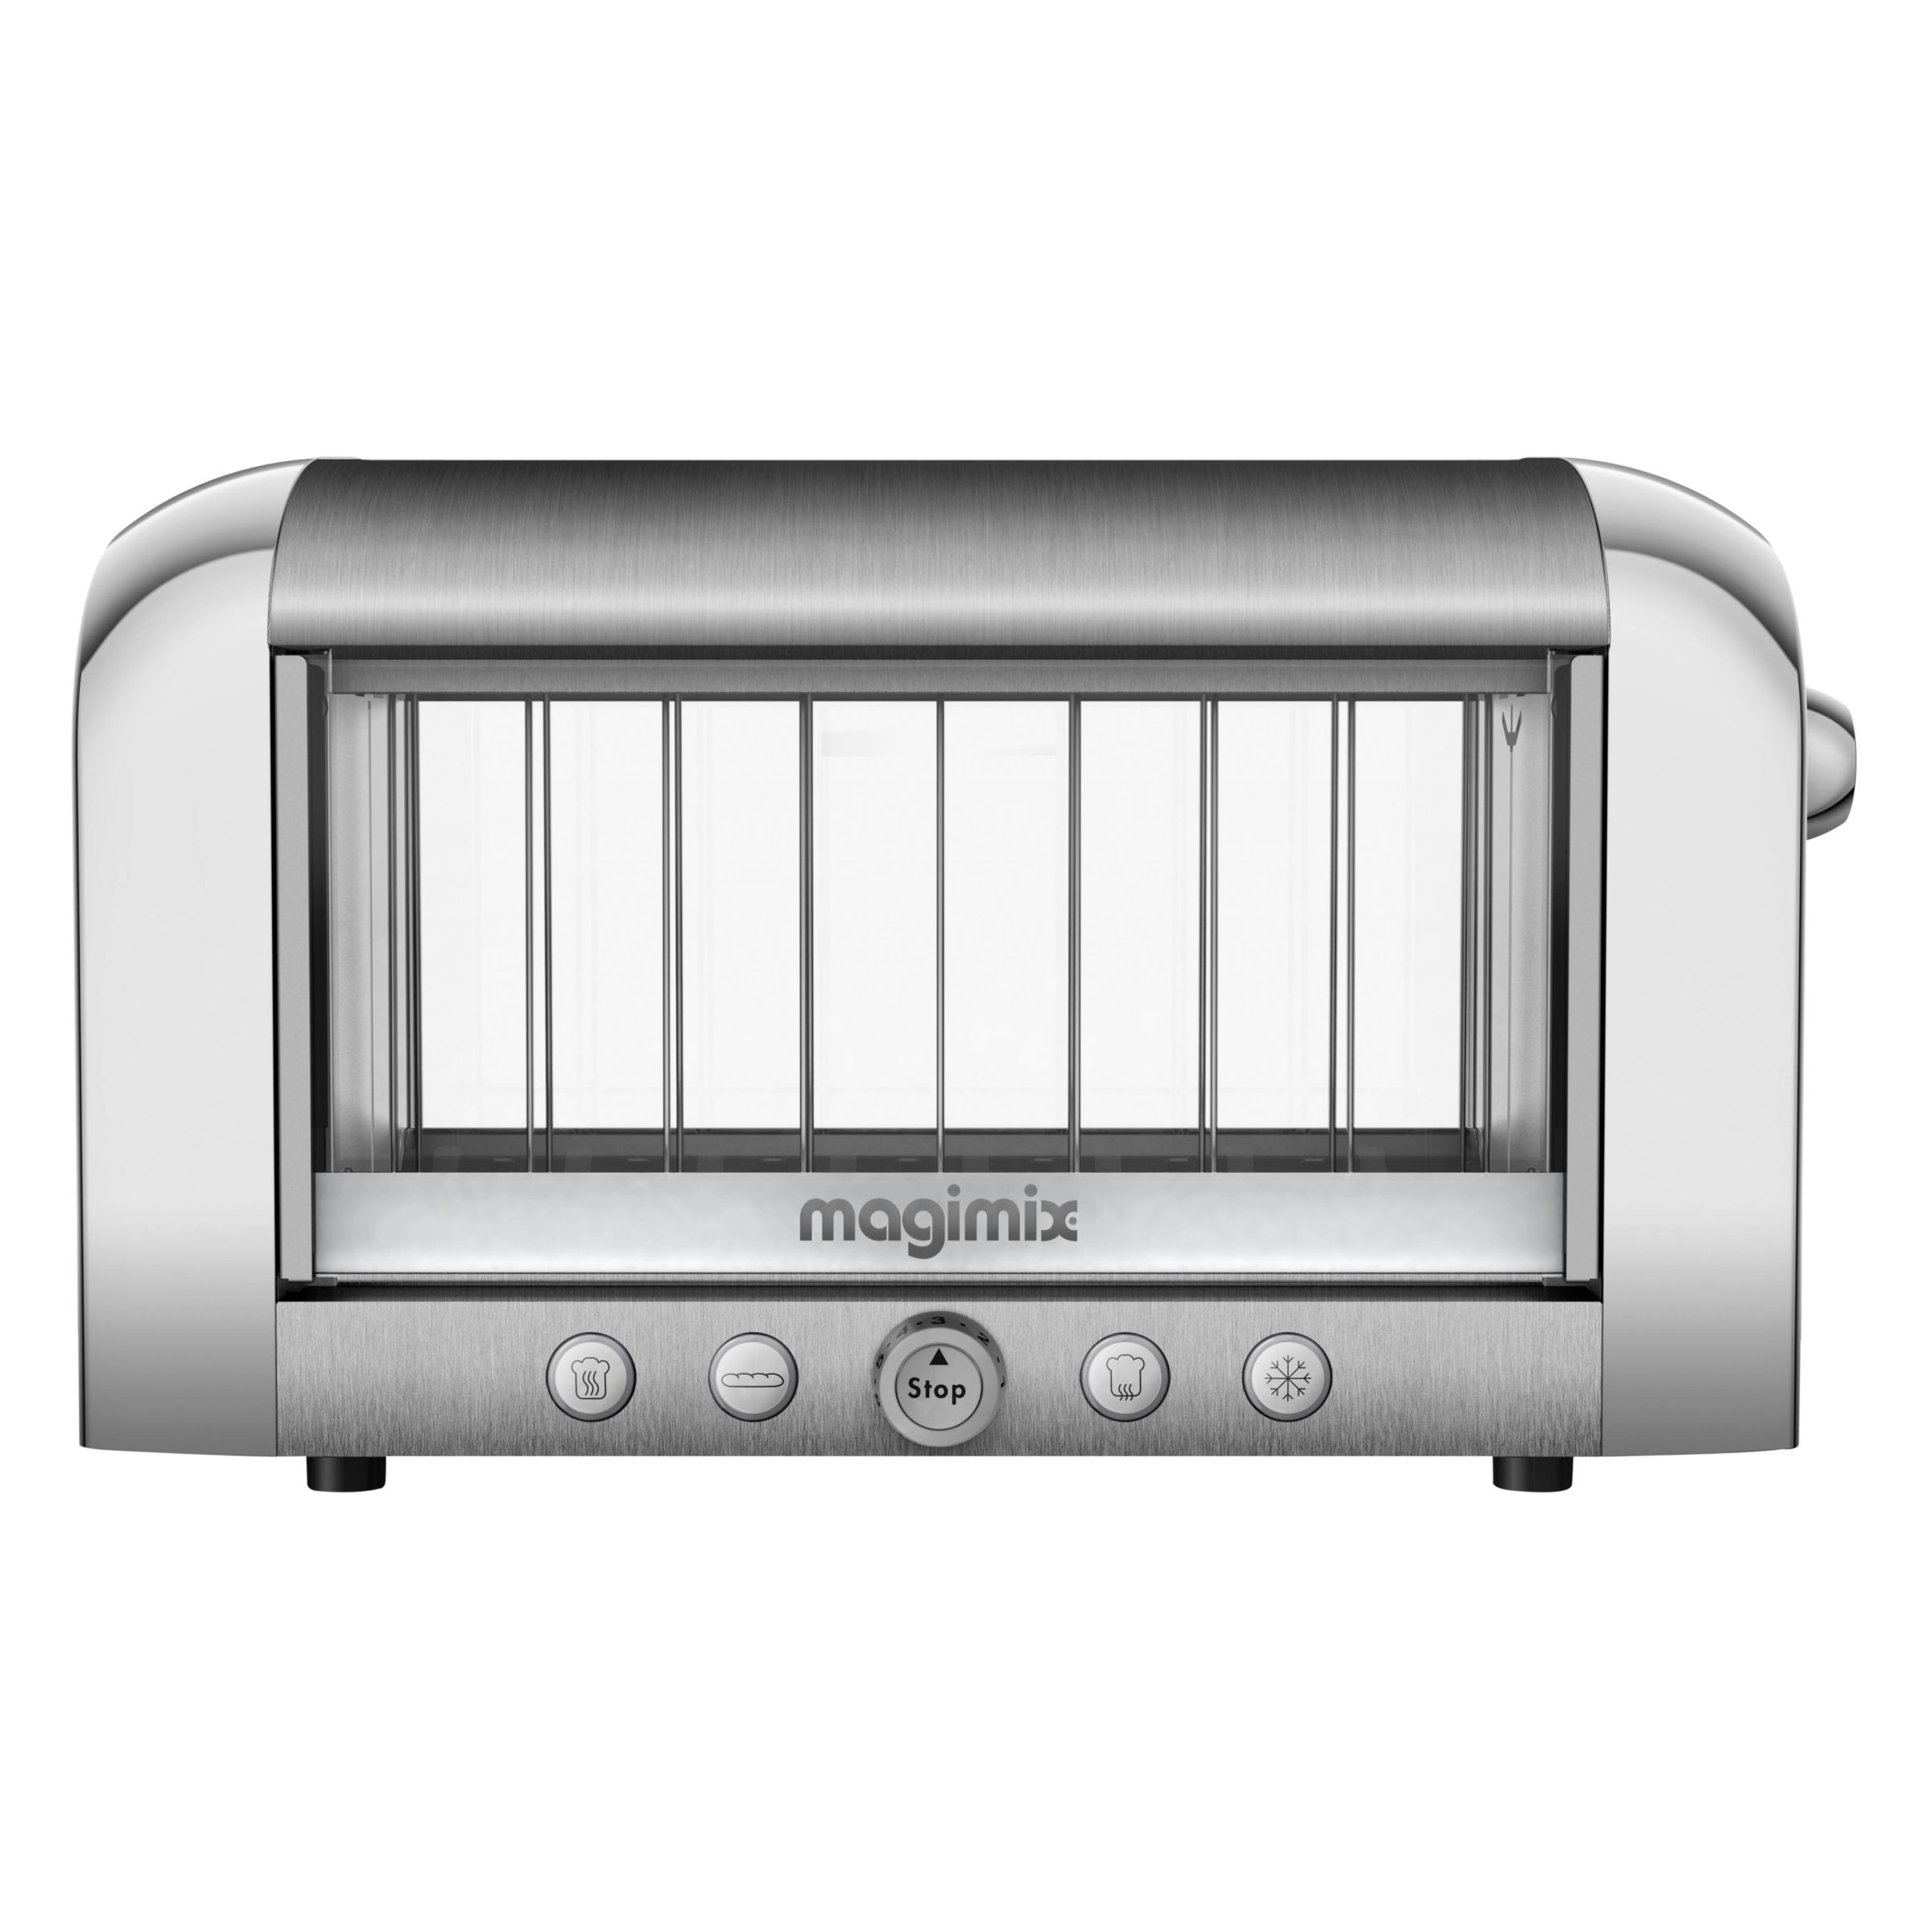 Magimix 11526, Vision Toaster, 2-Slice, Brushed Stainless Steel/Glass at John Lewis